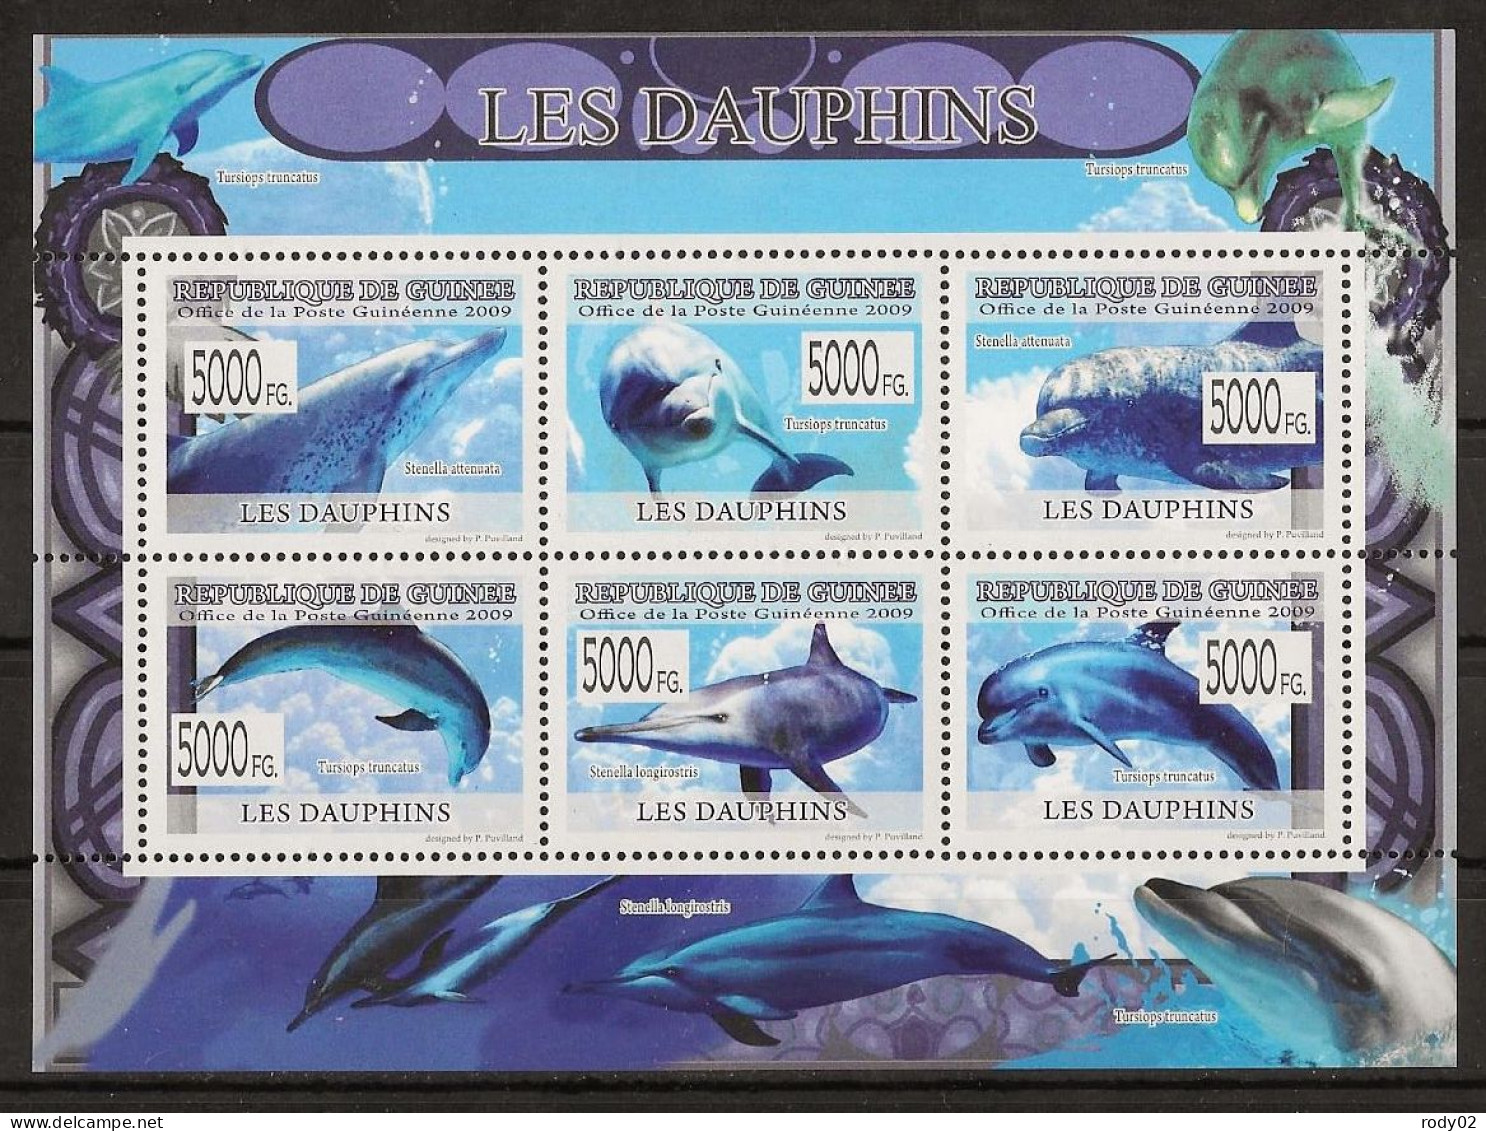 GUINEE - DAUPHINS - N° 4008 A 4013 ET BF 968 - NEUF** MNH - Dauphins